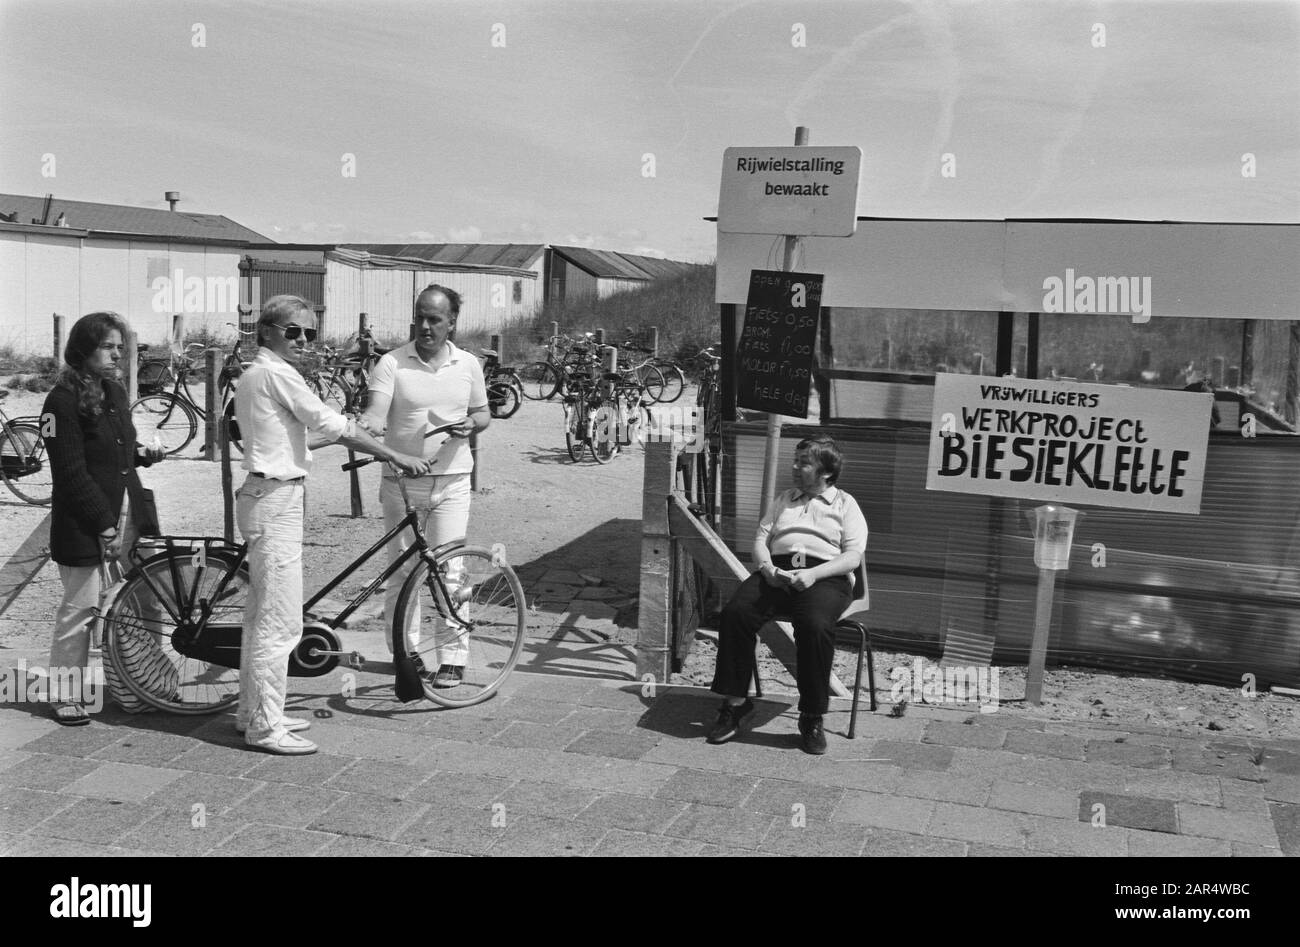 Bicycle parking staffed by unemployed persons, with retention of benefit in Scheveningen  Cyclist at the parking with the sign Volunteers work project Biesieklette Date: 20 July 1983 Location: Scheveningen, South Holland Keywords: bicycle parking, volunteers, unemployment Stock Photo